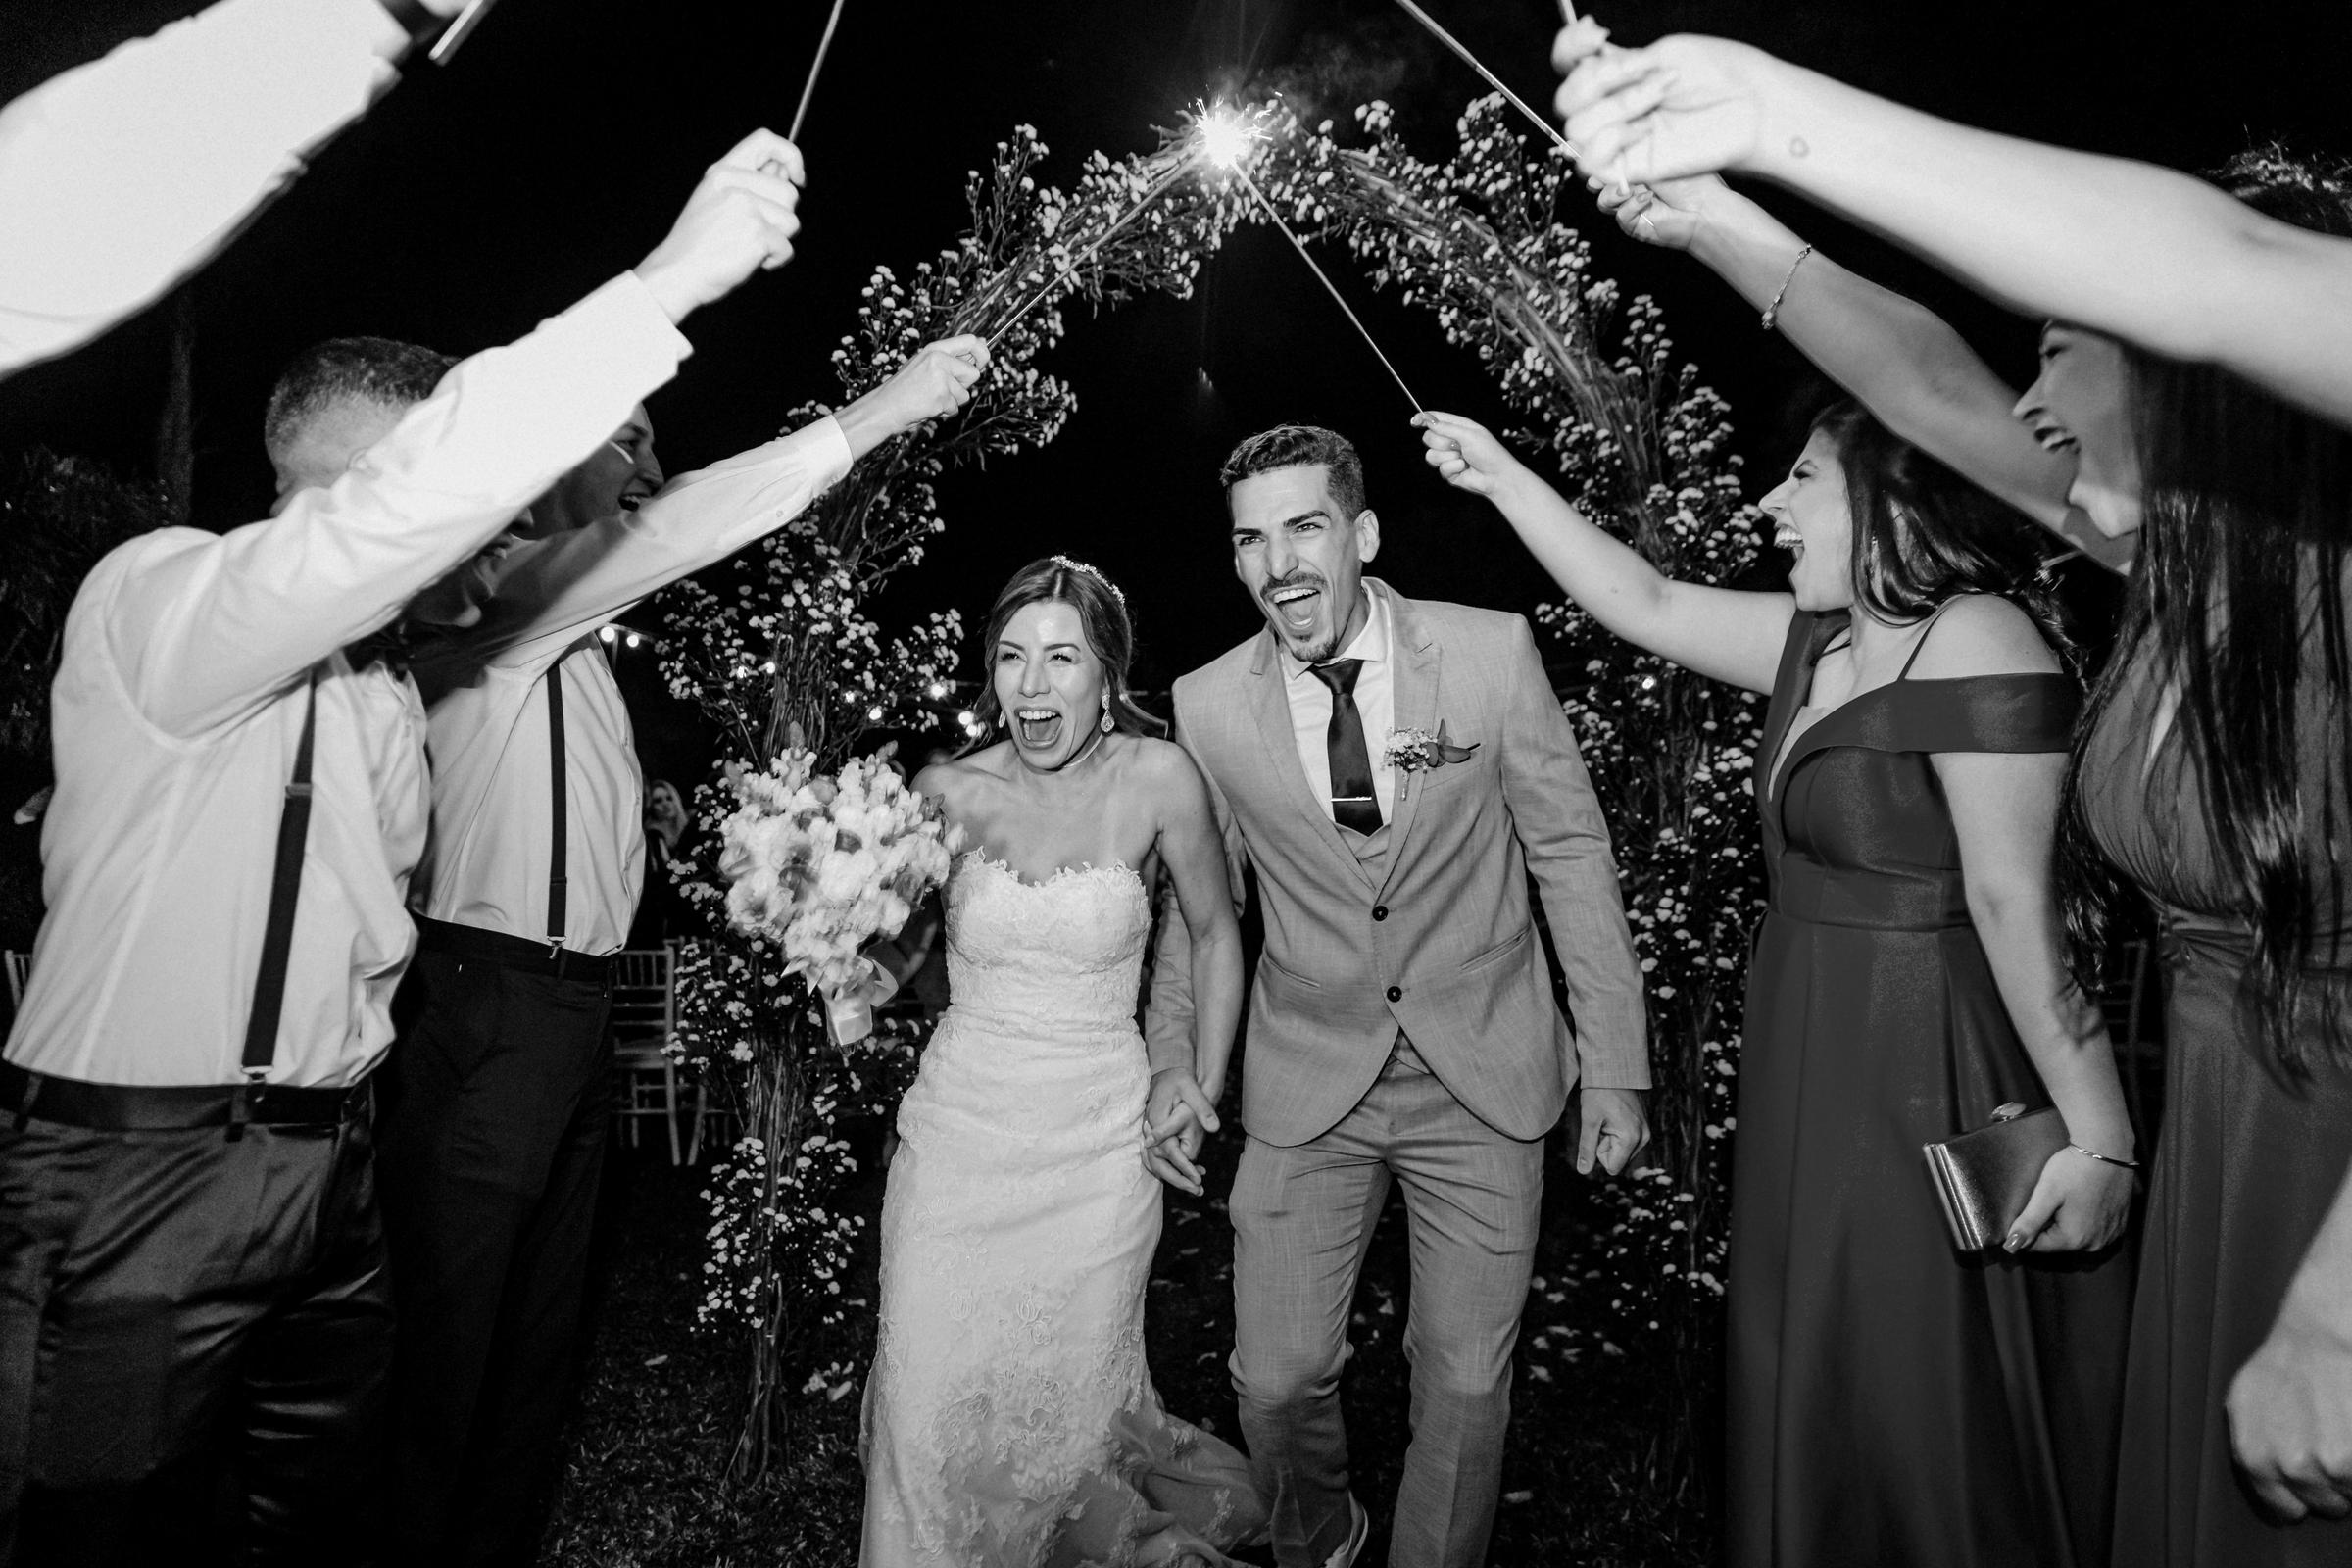 The bridesmaids and other wedding guests celebrating joyously | Source: Pexels